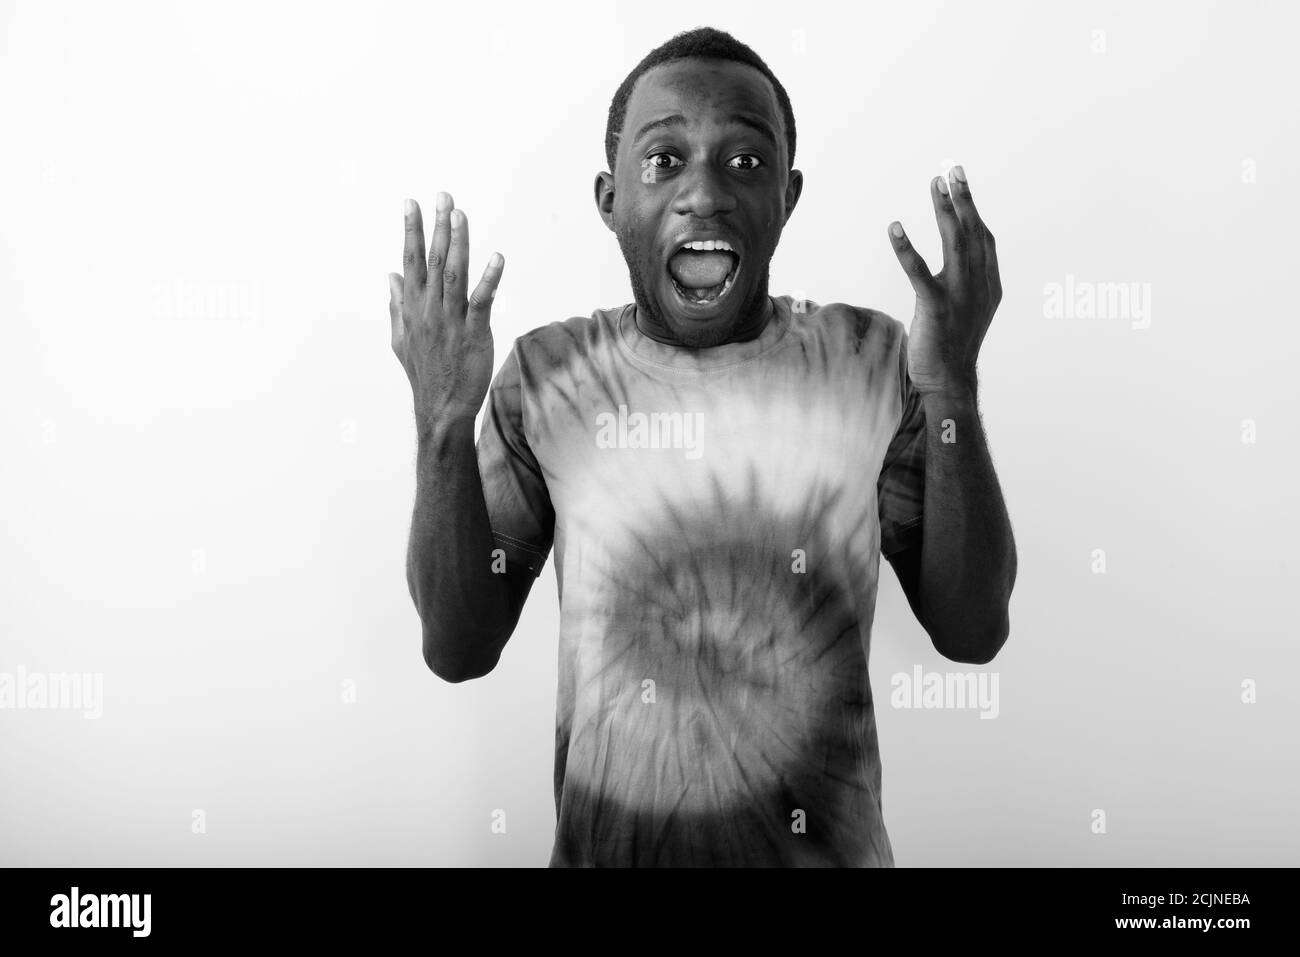 Studio shot of young surprised black African man looking shocked against white background Stock Photo